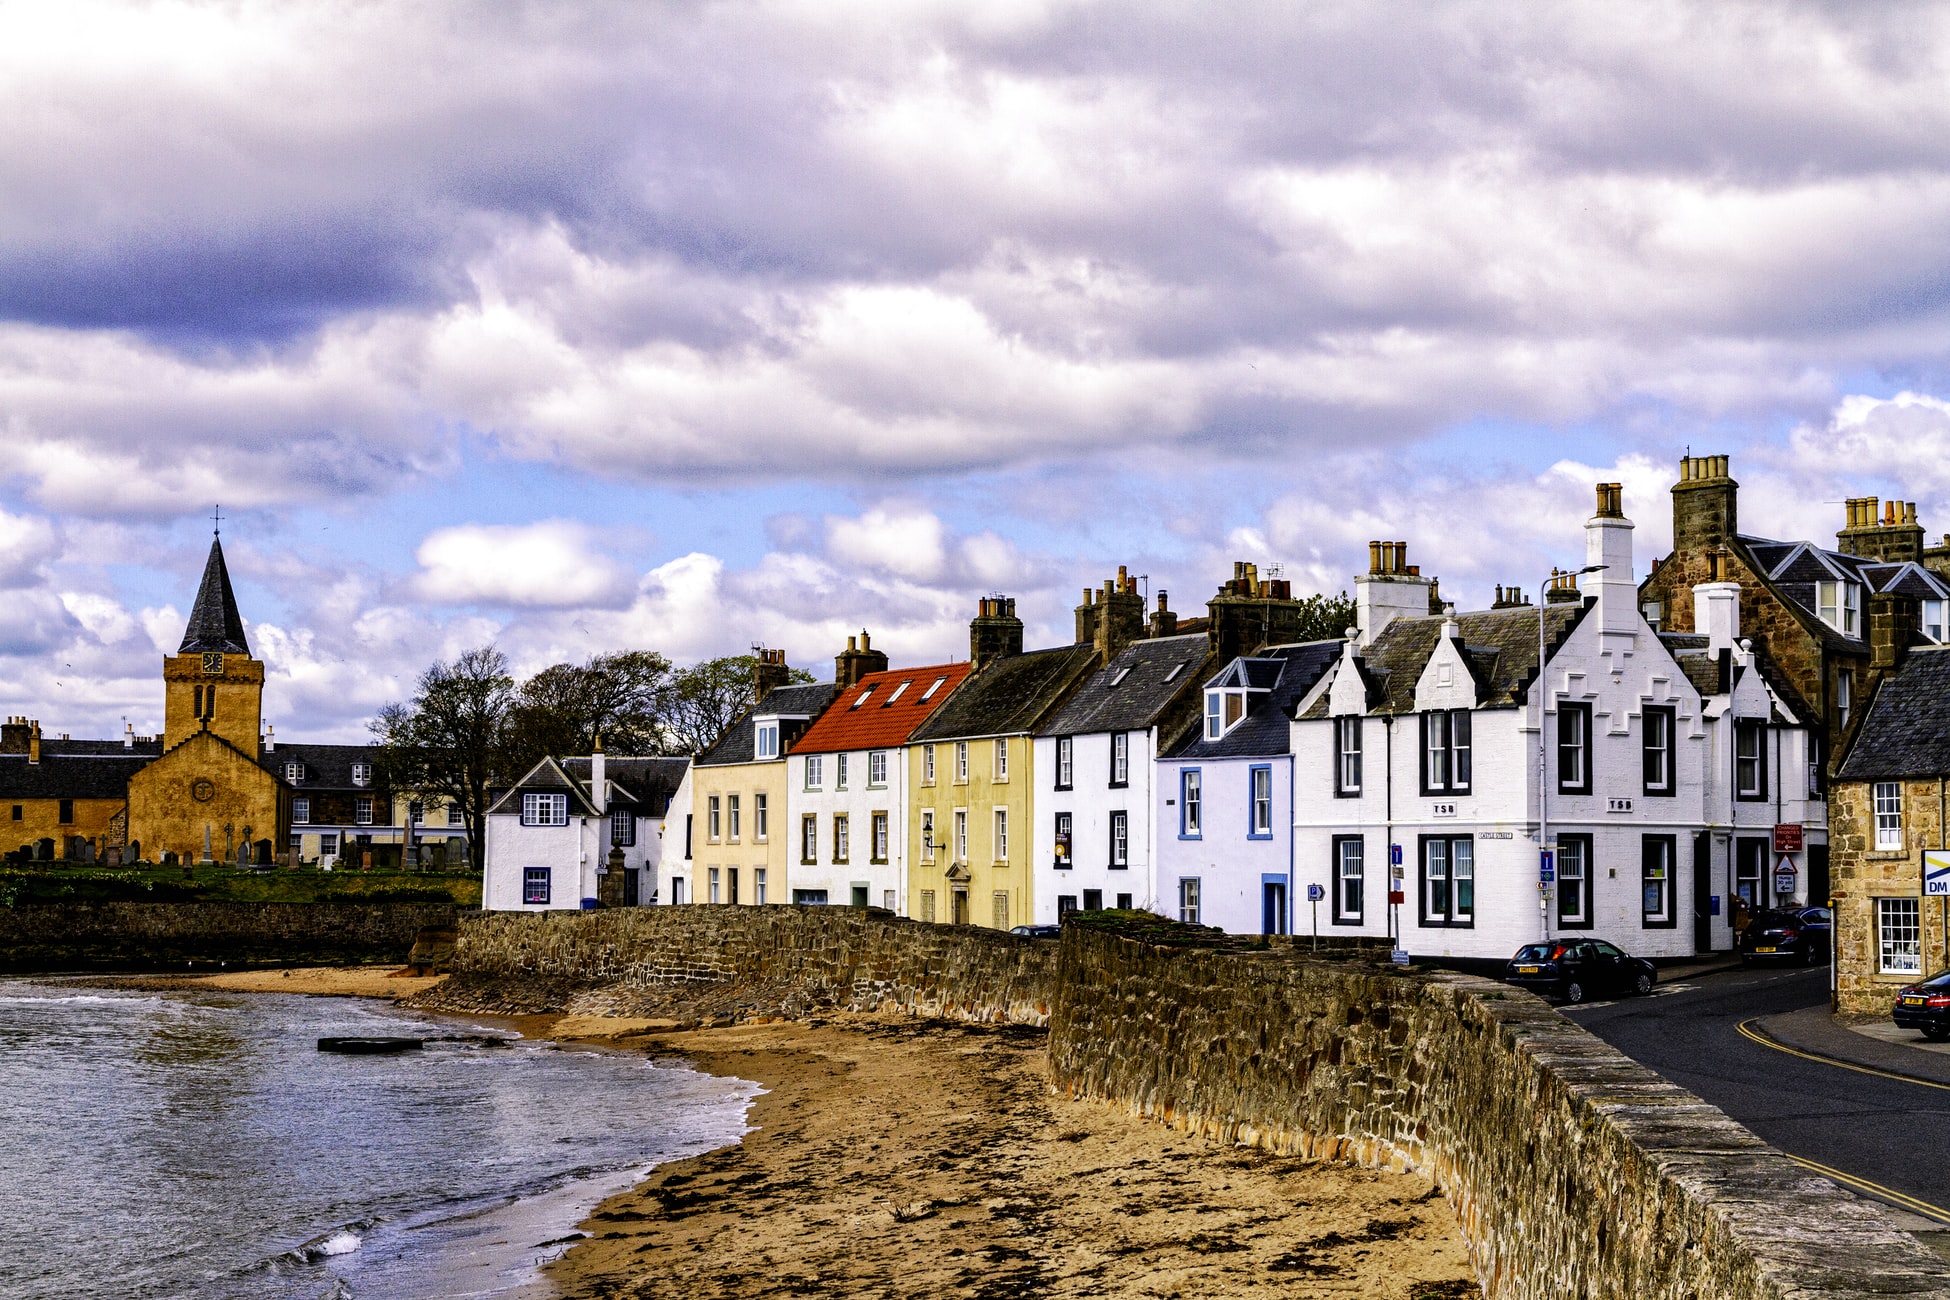 Colourful row of houses in Anstruther